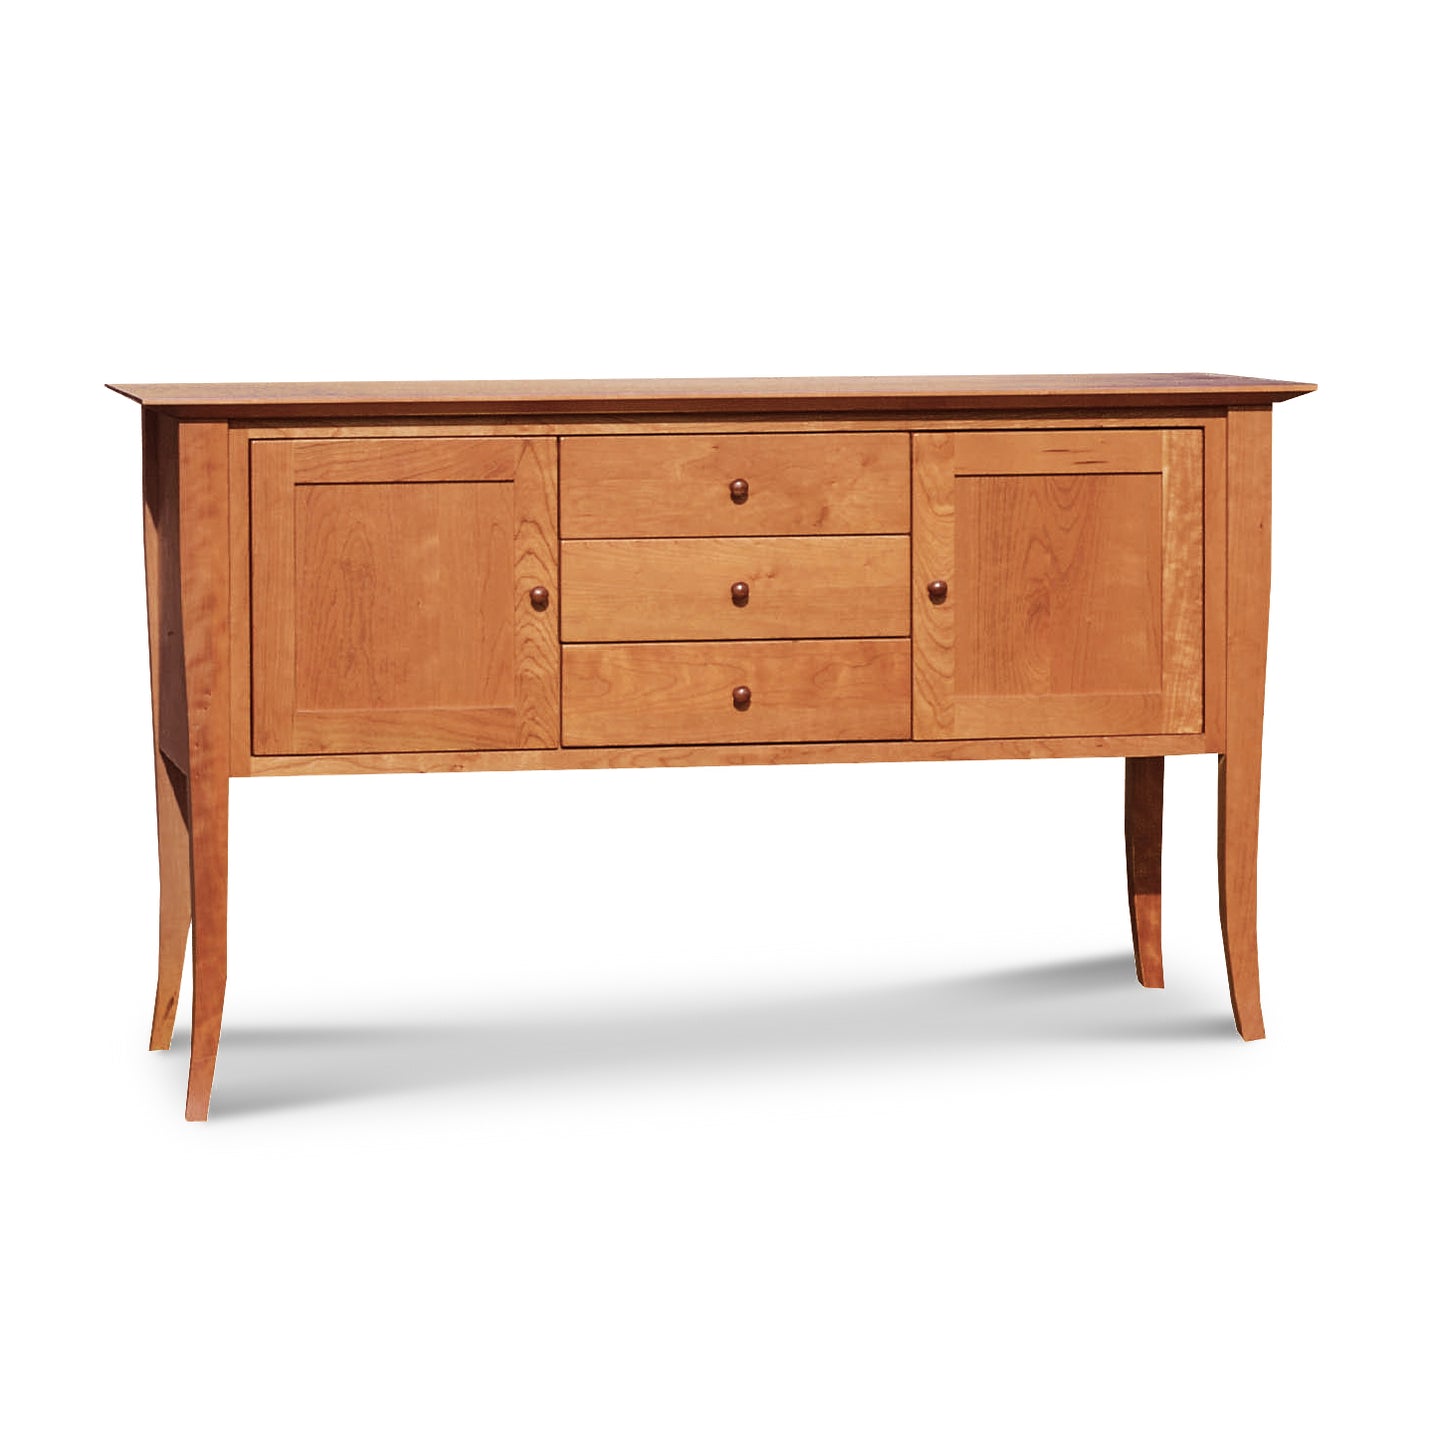 This Lyndon Furniture Classic Shaker Flare Leg Small Buffet is handcrafted in Vermont and features two drawers and two doors, making it the perfect addition to any dining room or kitchen.